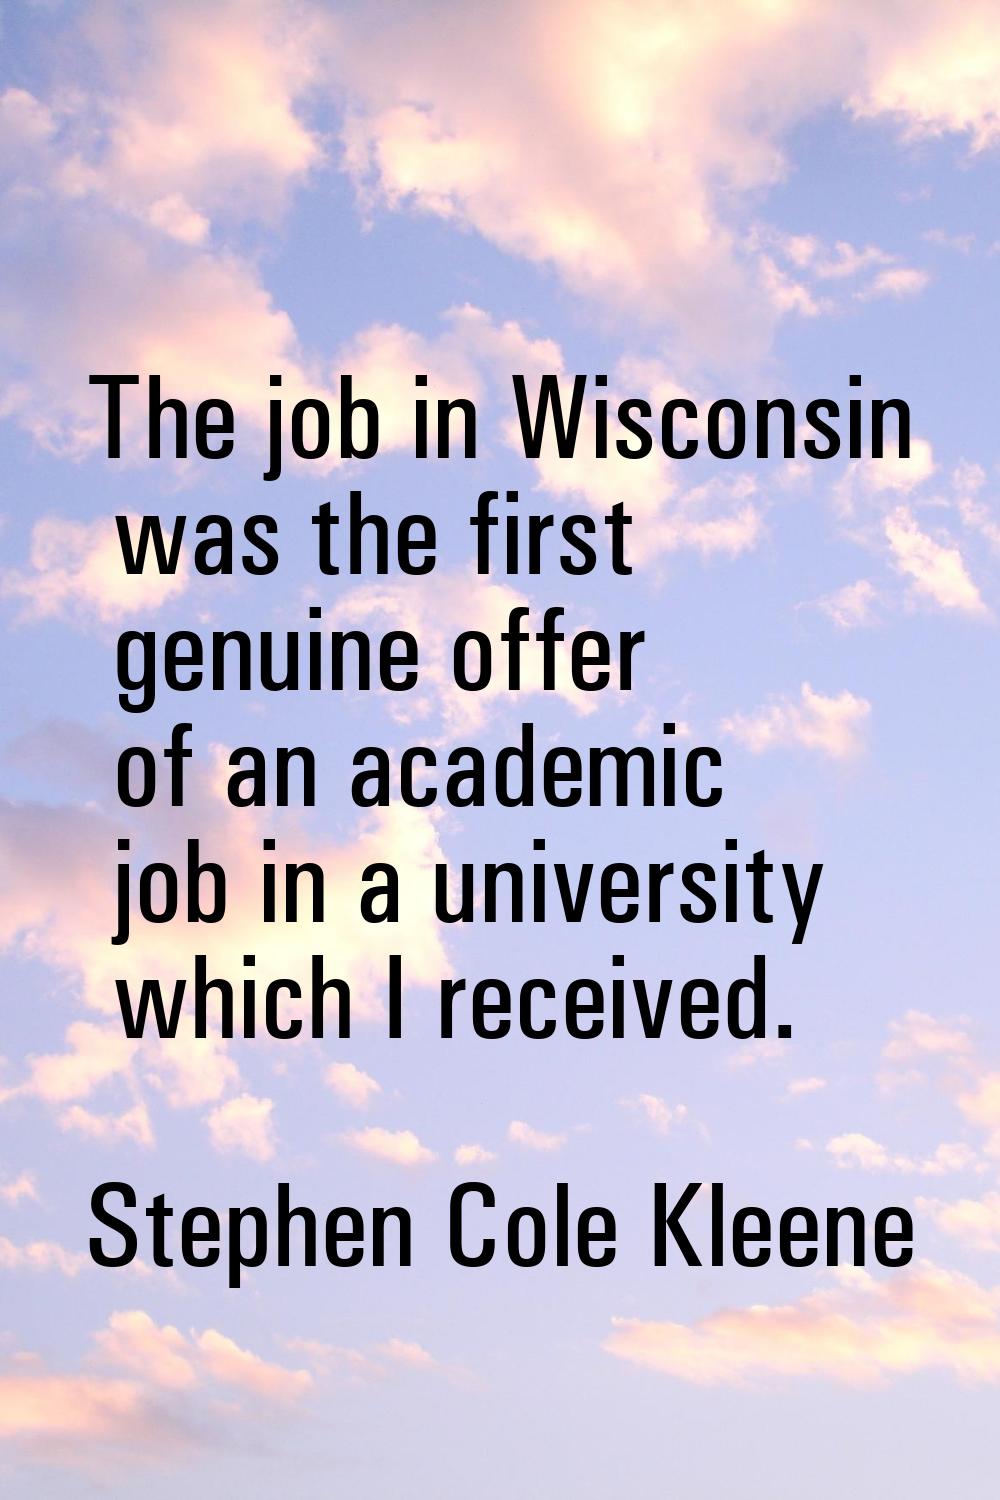 The job in Wisconsin was the first genuine offer of an academic job in a university which I receive